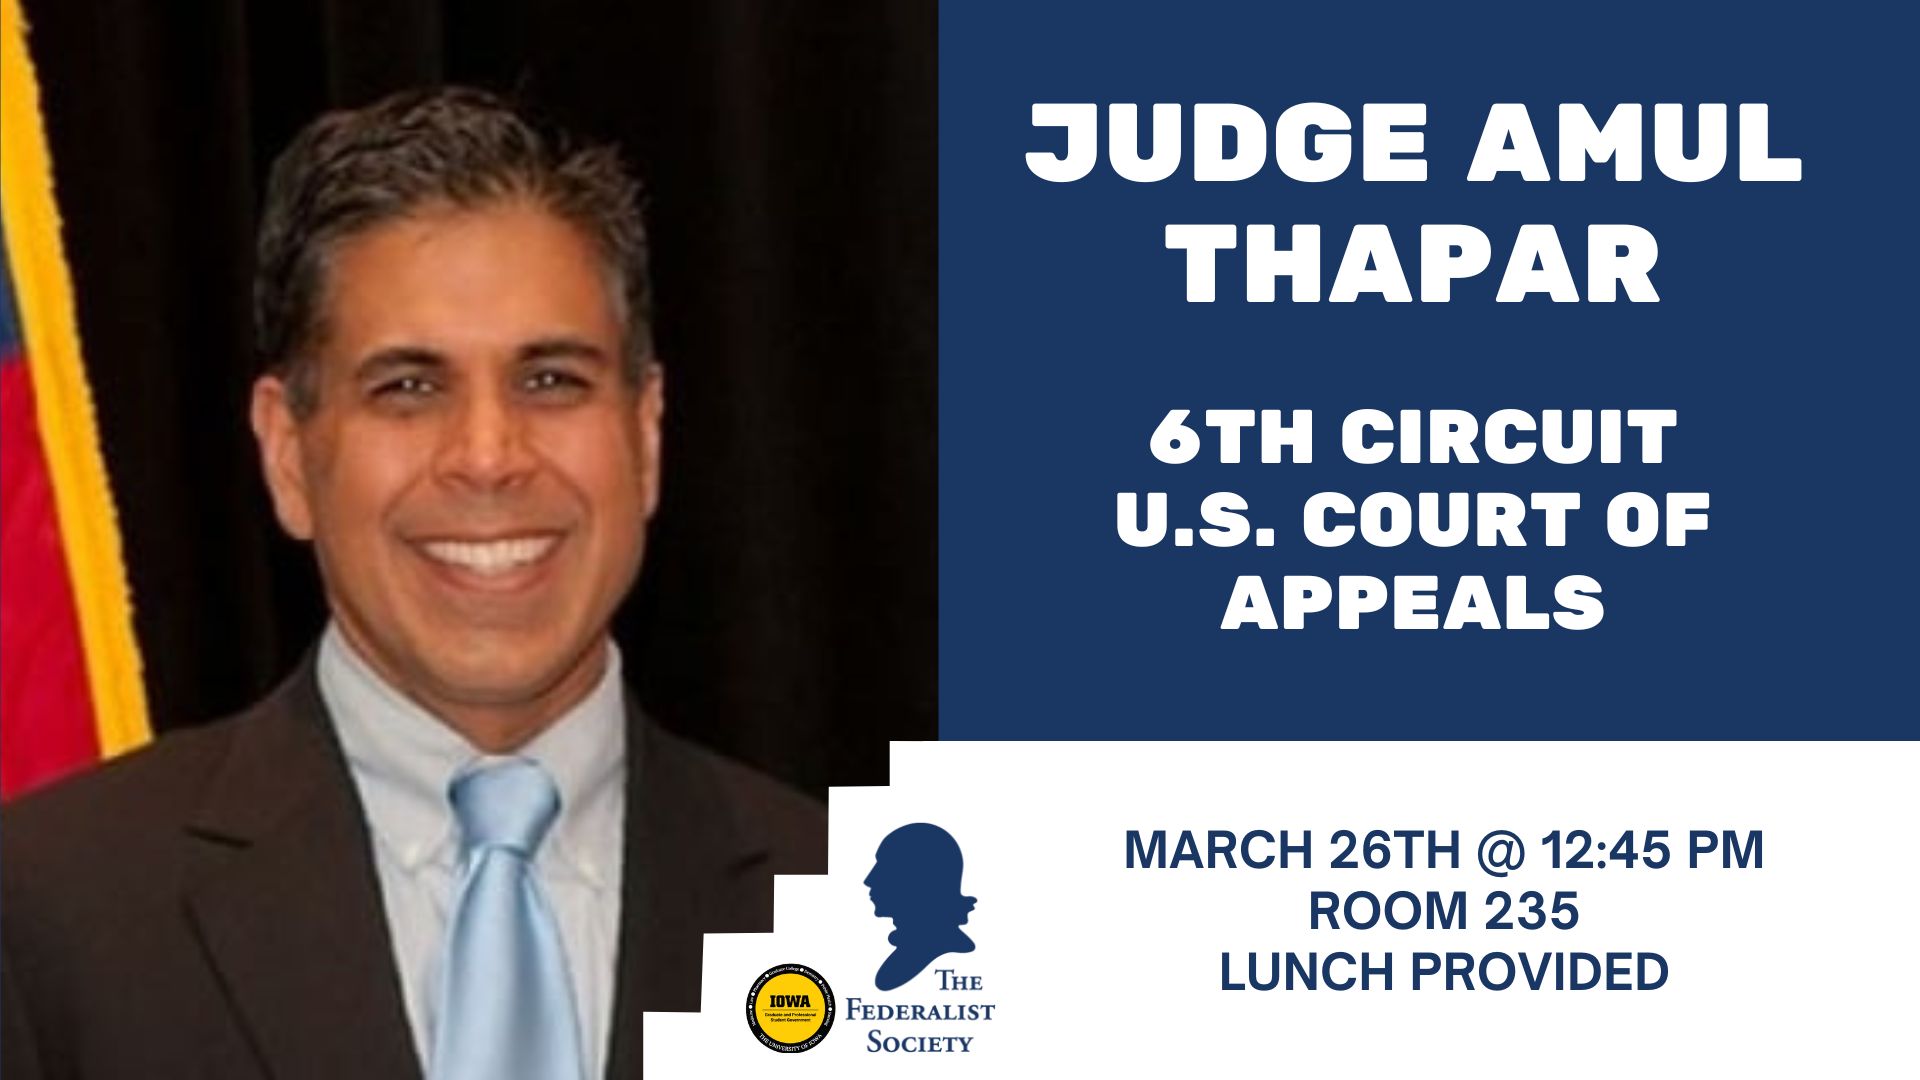 Federalist Society hosts 6th Circuit US Court of Appeals Judge Amul Thapar on March 26th at 12:45 pm in room 235. Lunch will be provided.